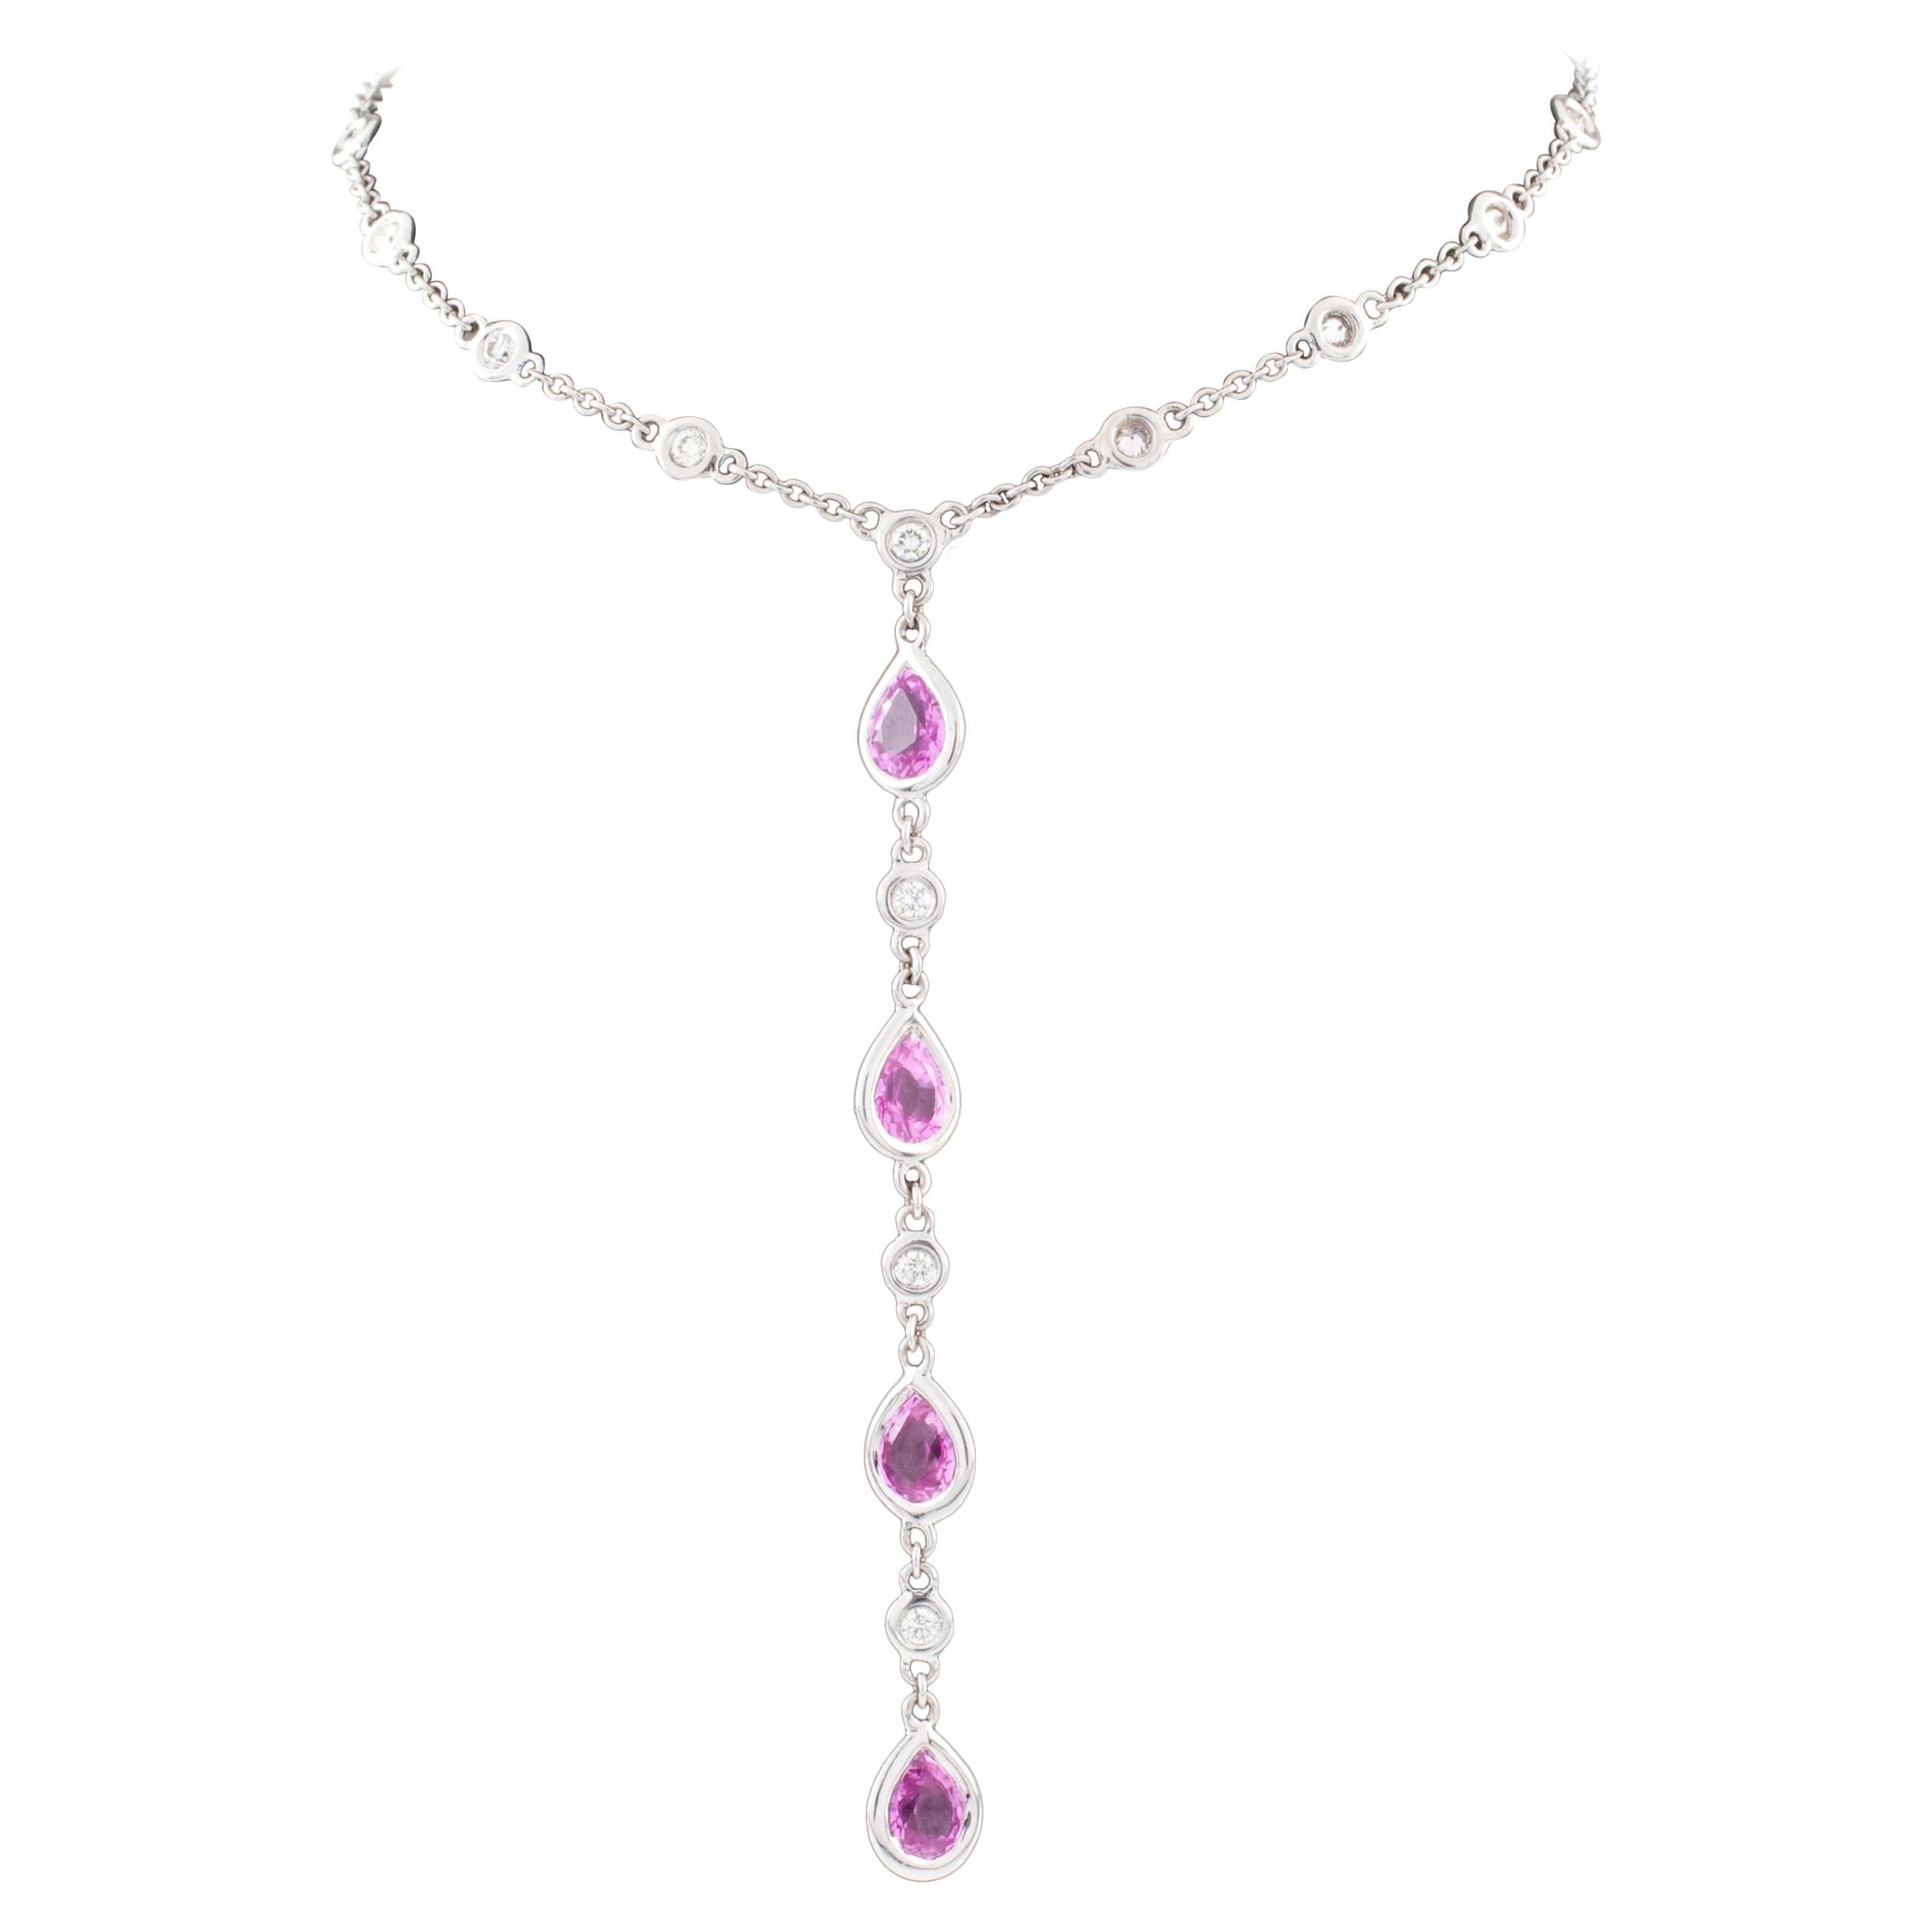 4.2 Carat Diamond and Pink Sapphire White Gold Necklace with Drop Pendant For Sale